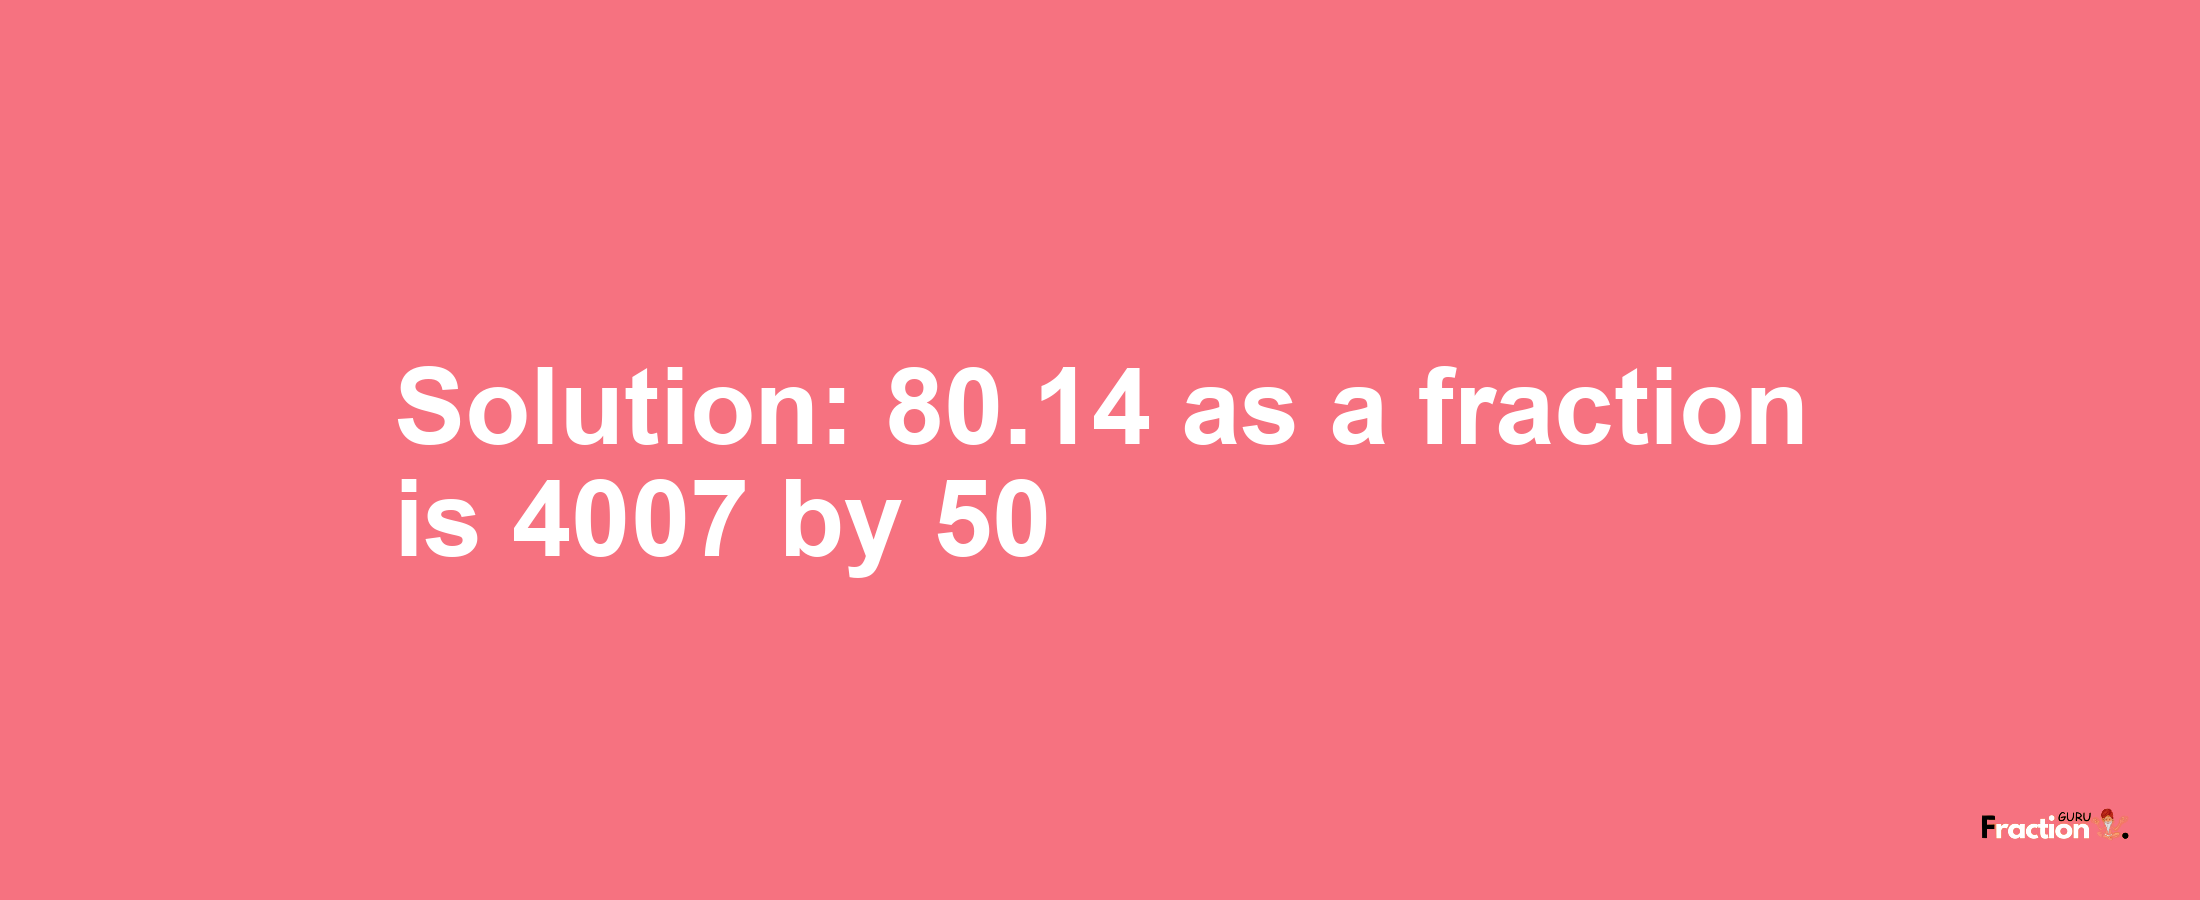 Solution:80.14 as a fraction is 4007/50